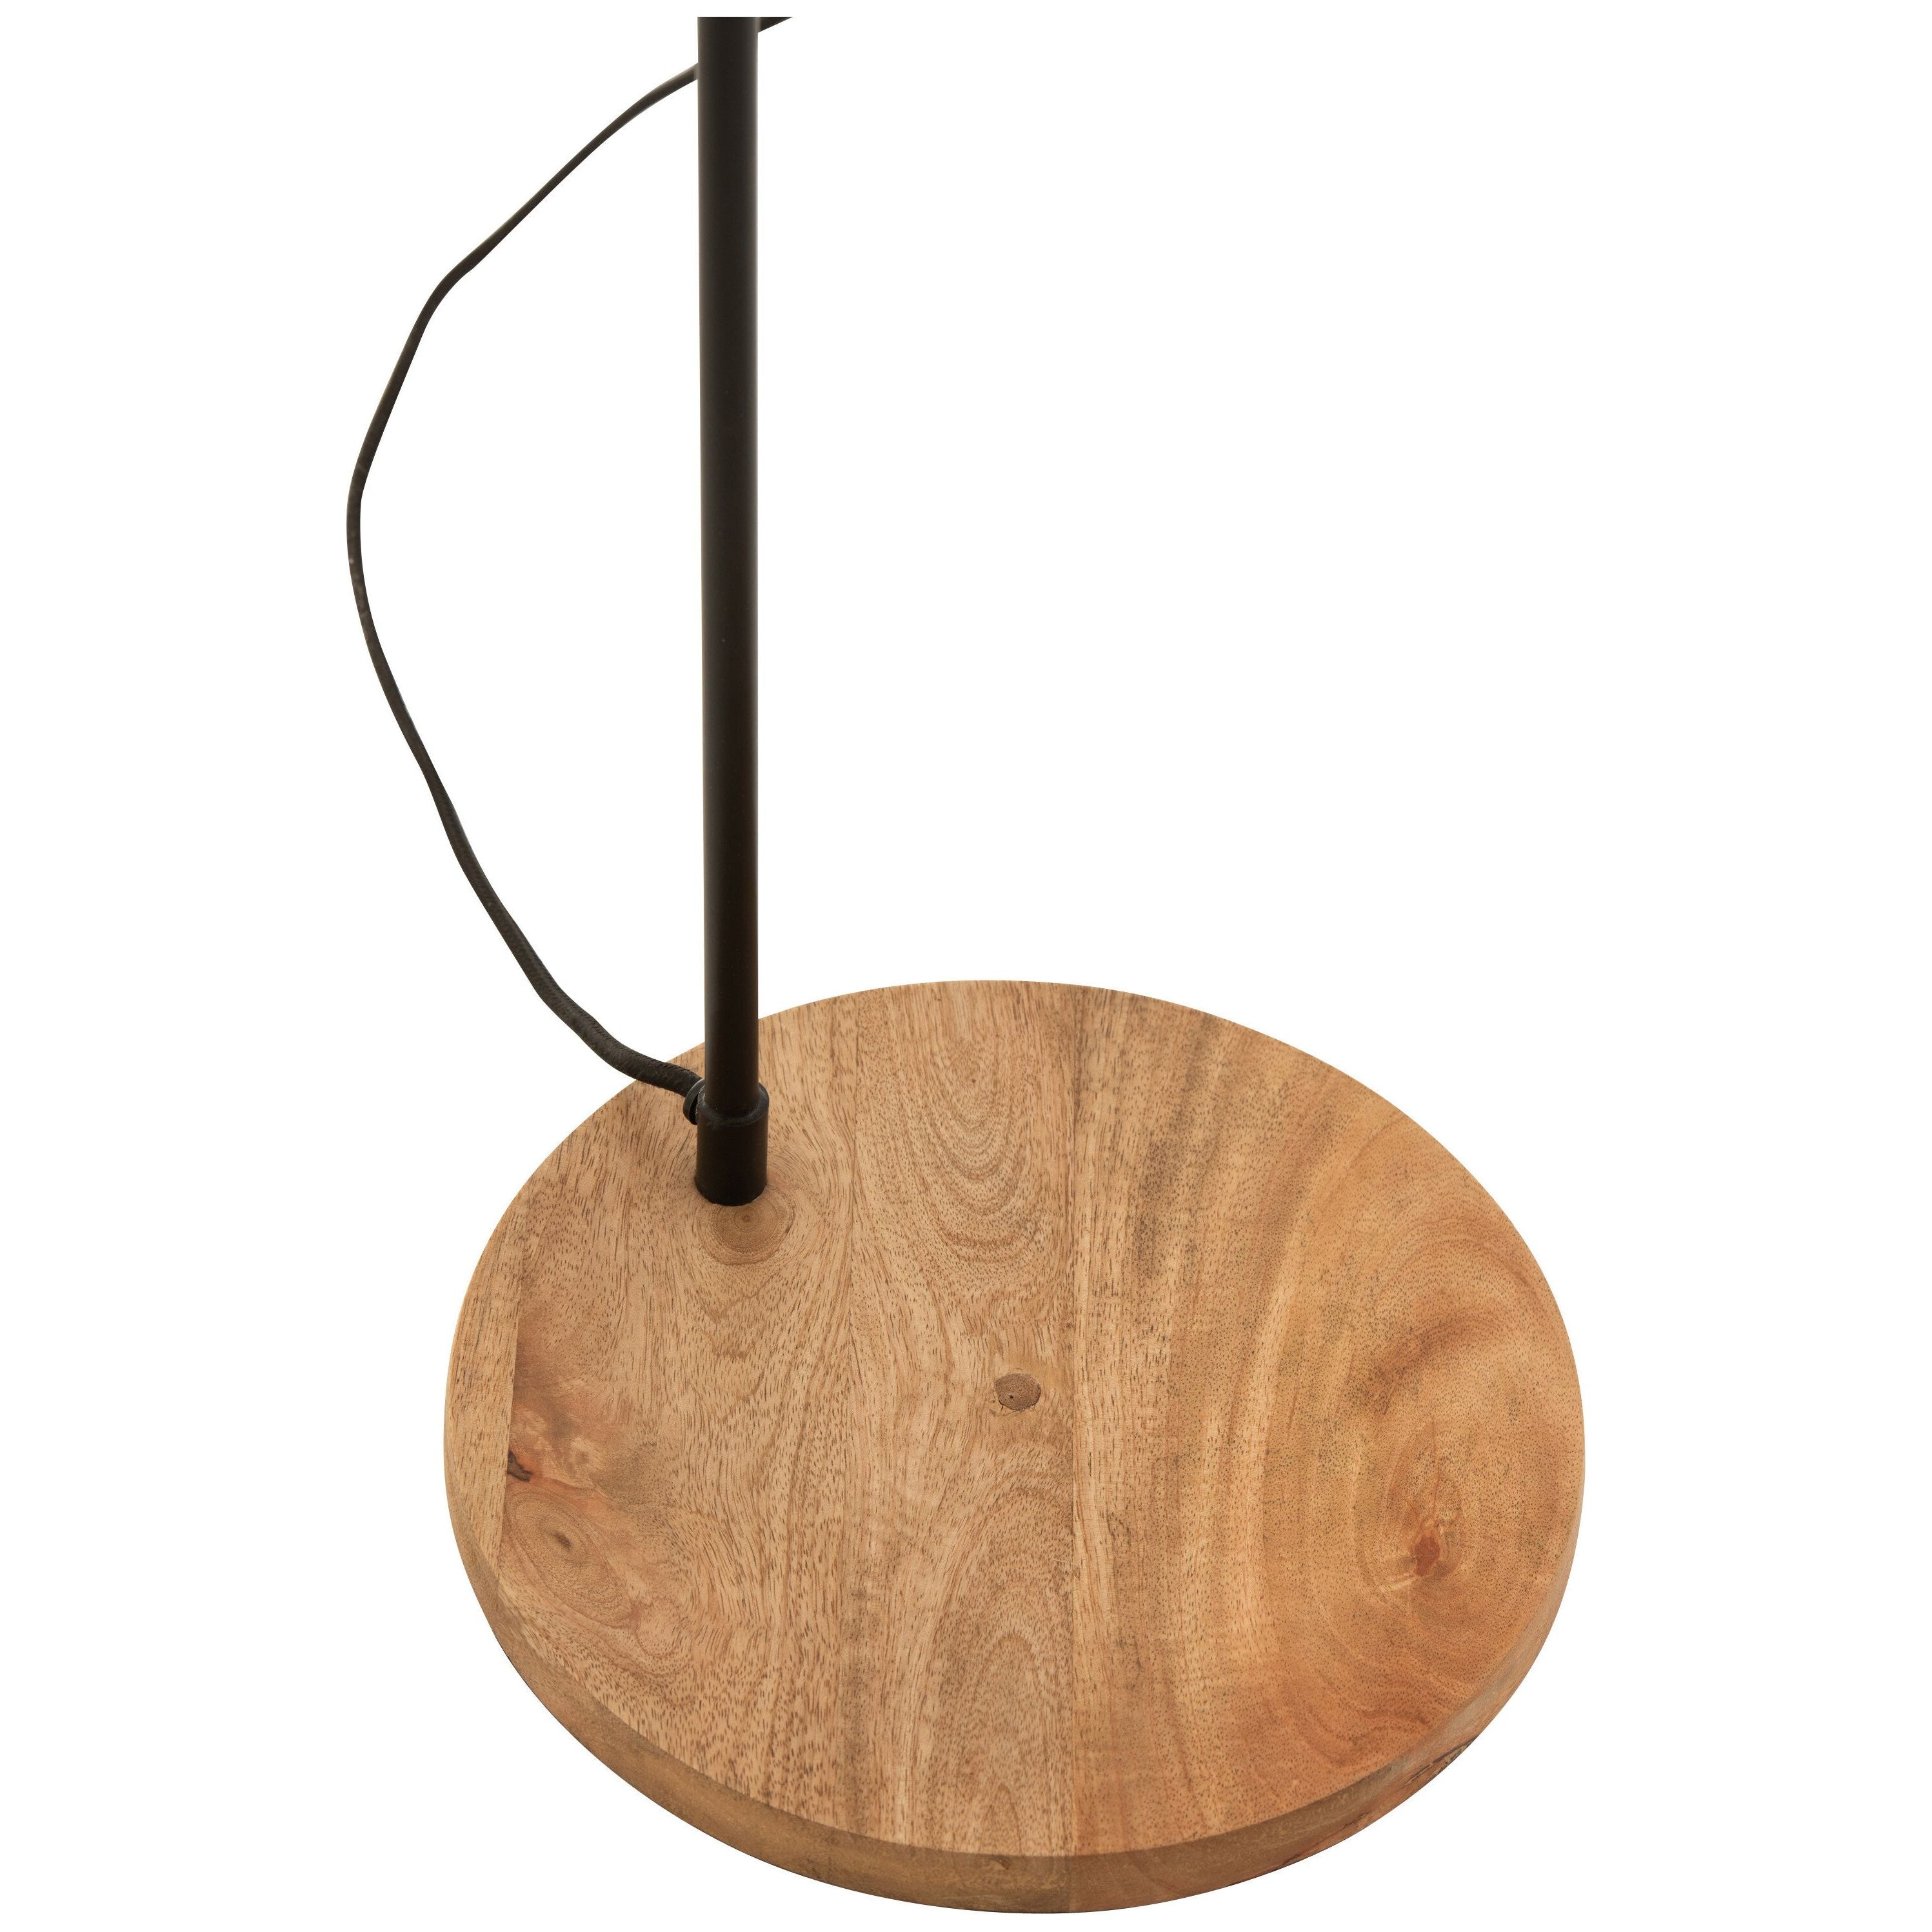 Standing Lamp Evy Iron/wood Black/natural